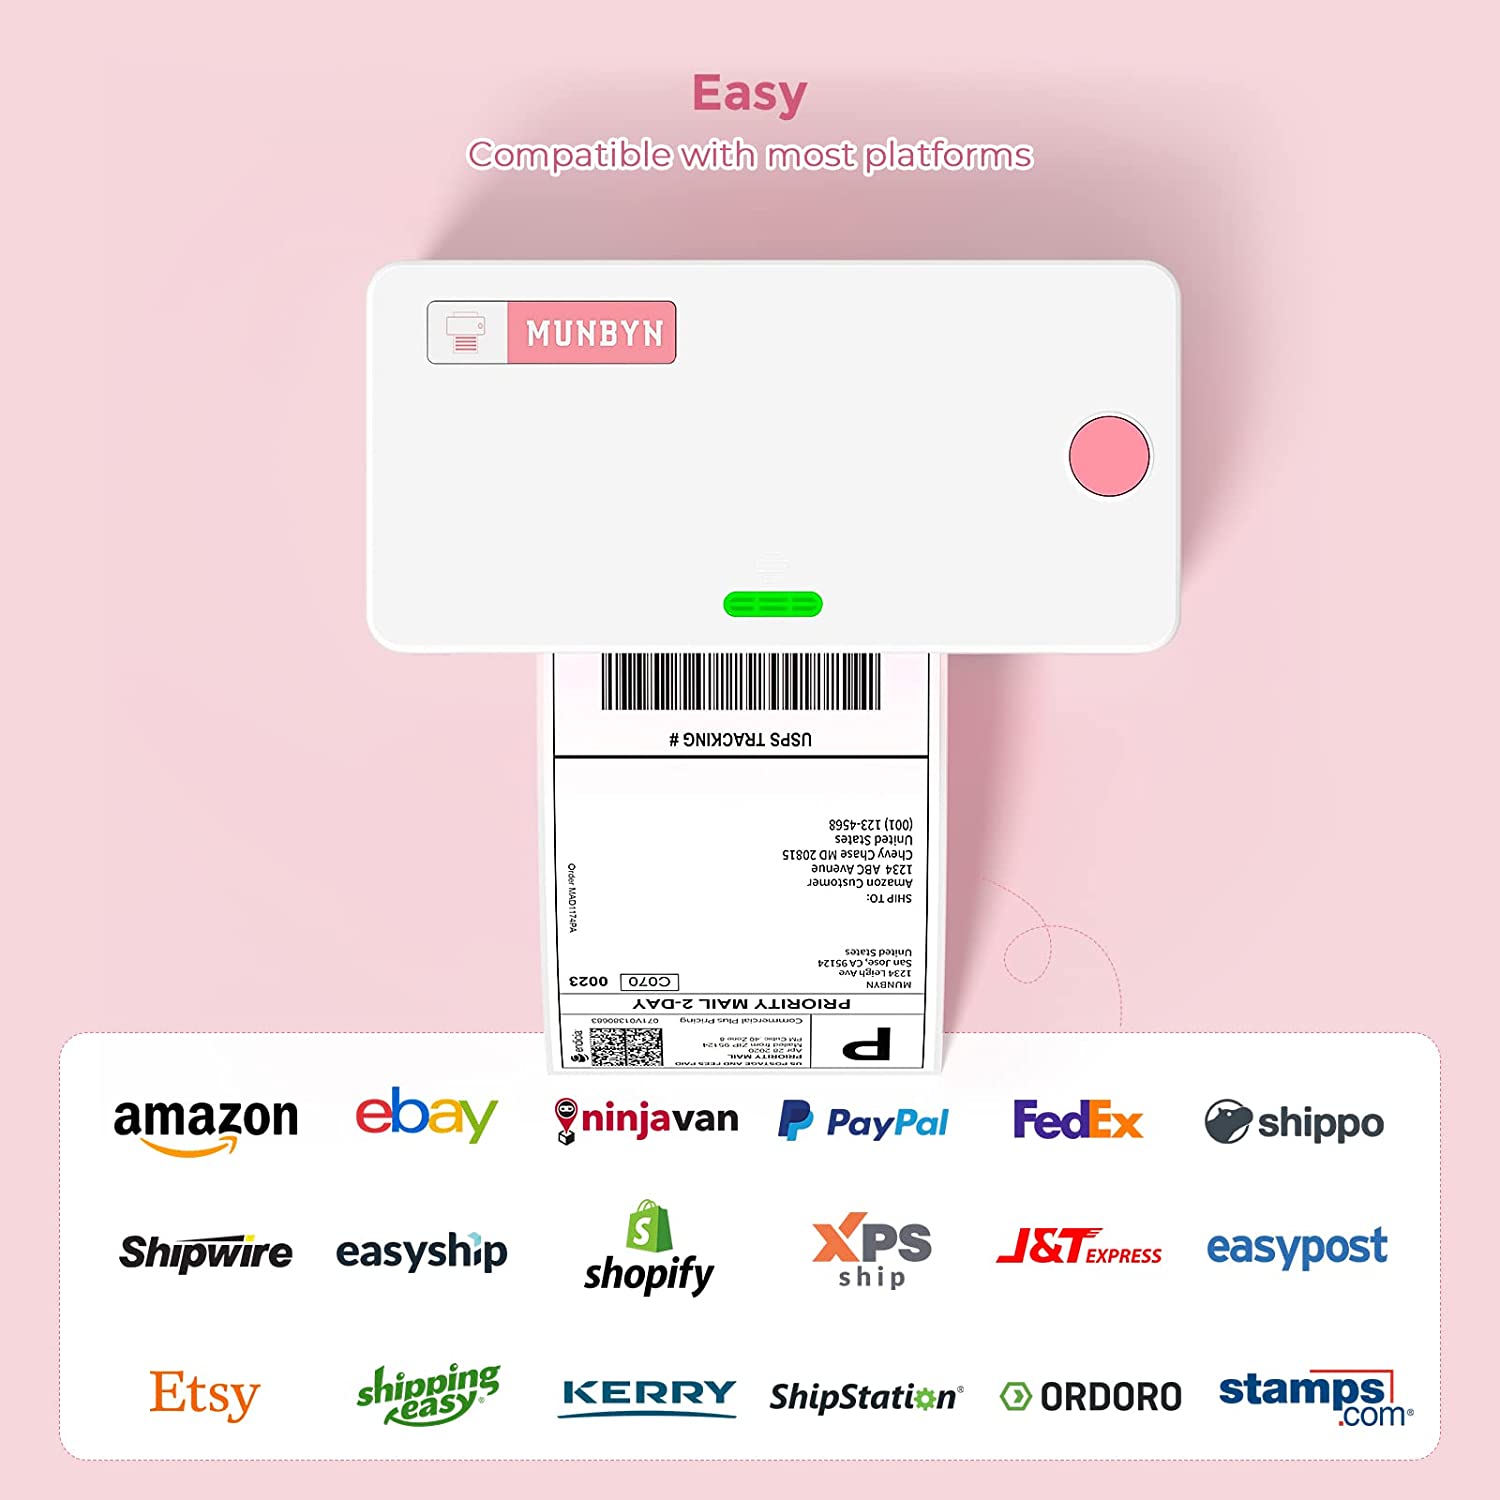 MUNBYN pink thermal printer kit is suitable for printing UPS, FedEx, Amazon, and eBay shipping labels.